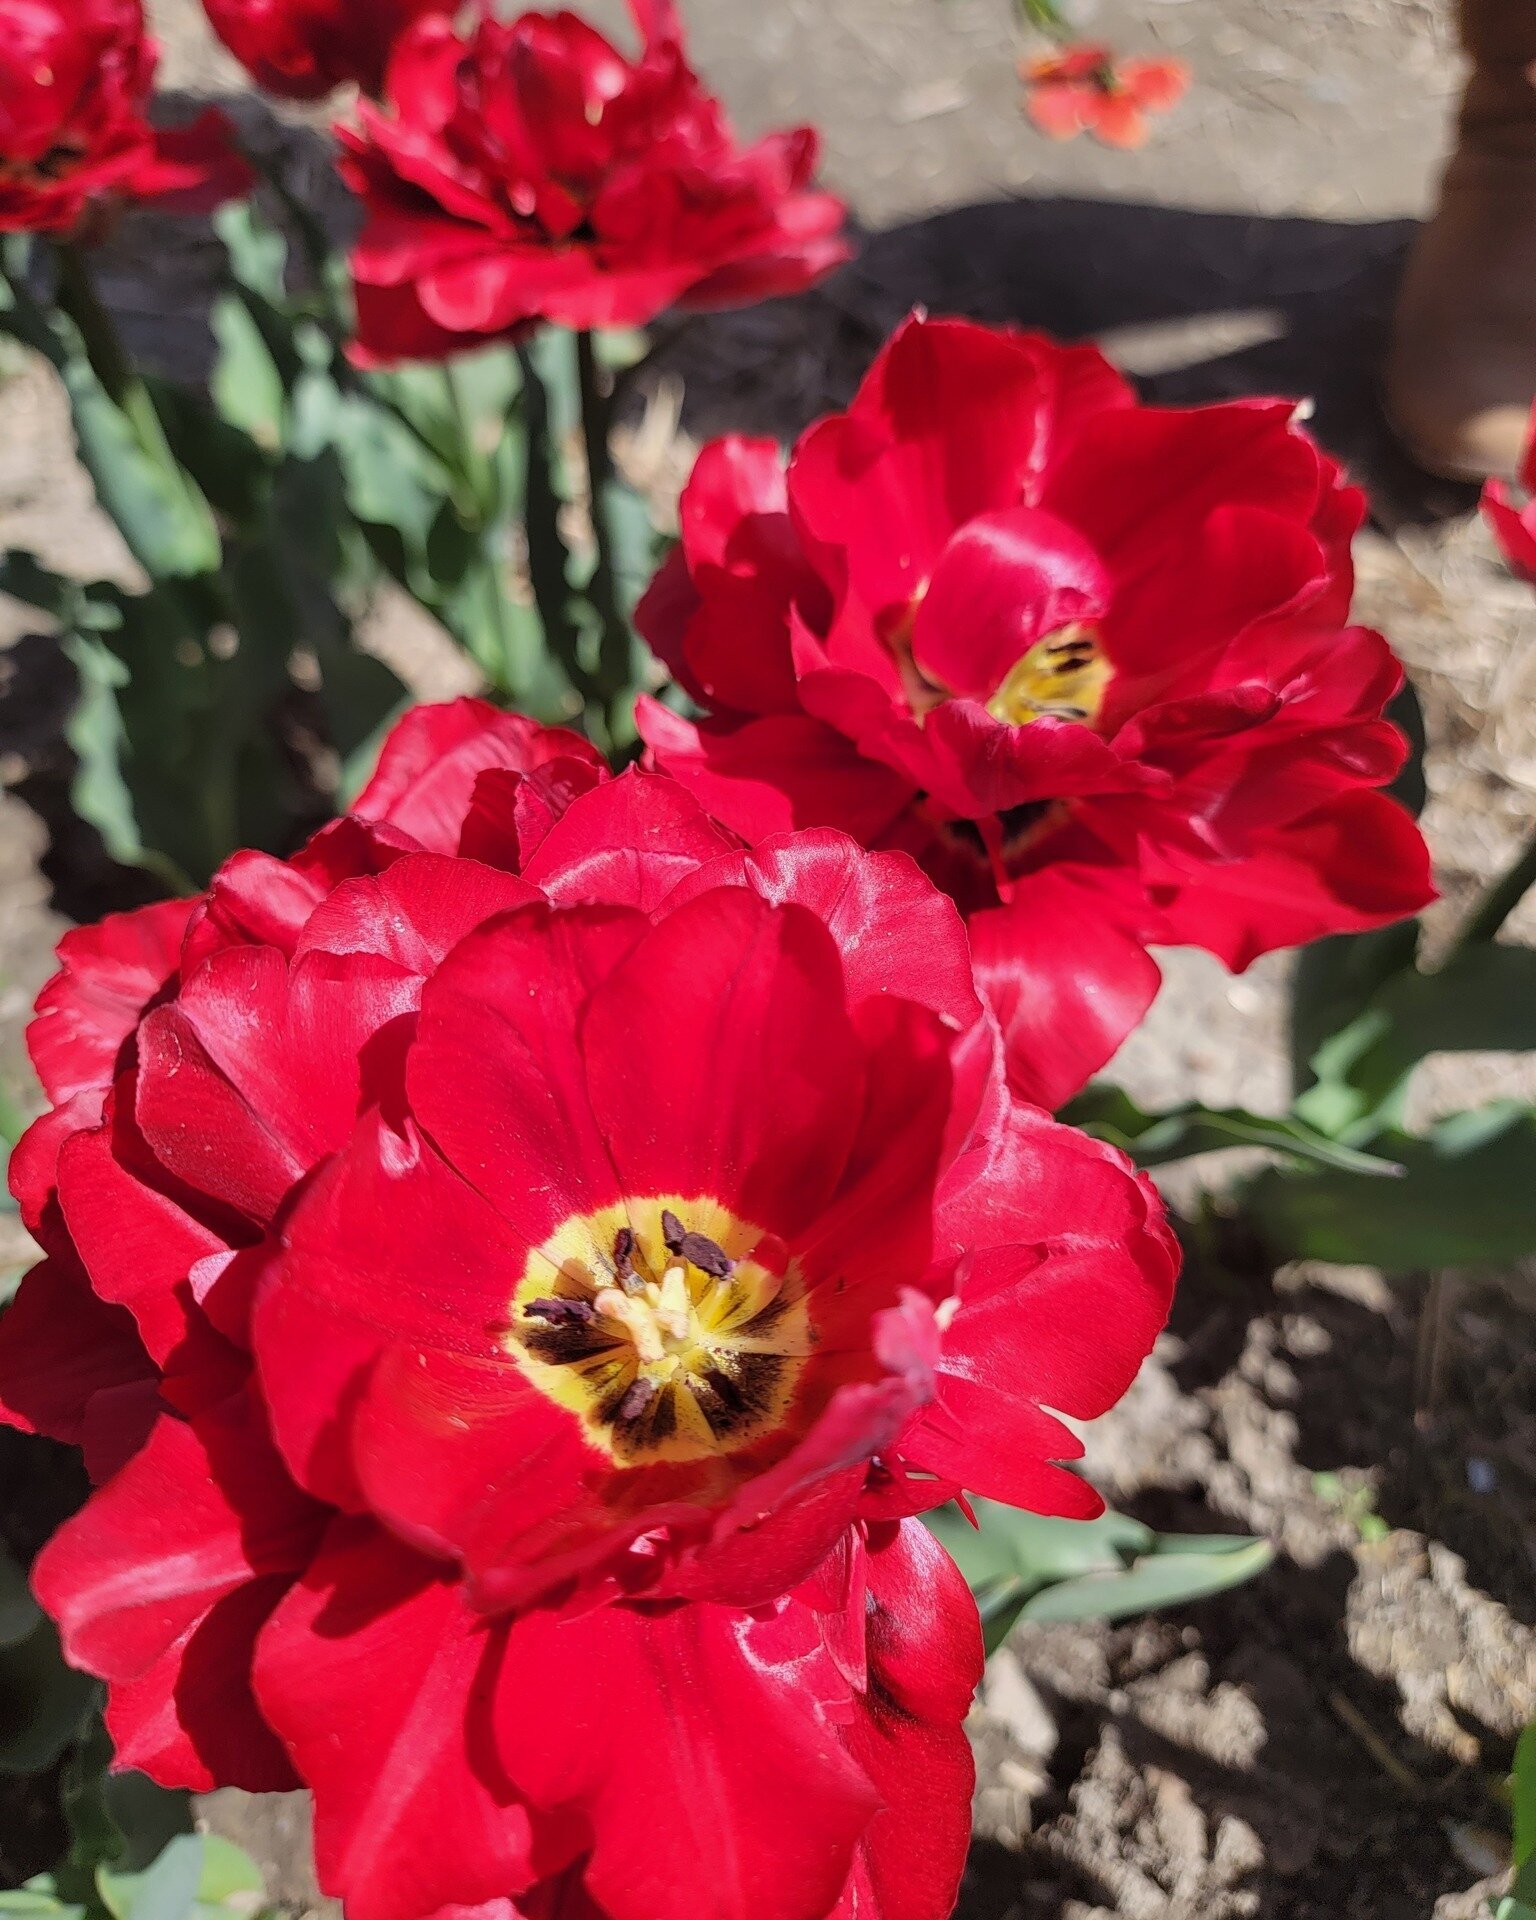 Last week we visited Cider Hill Farm in Amesbury. It was a beautiful day to pick tulips with @sjuth and Rene Larson 

Plan to visit them for summer picking, cider, kid activities, and more! https://www.ciderhill.com/

$5 bucket of bulbs going on this